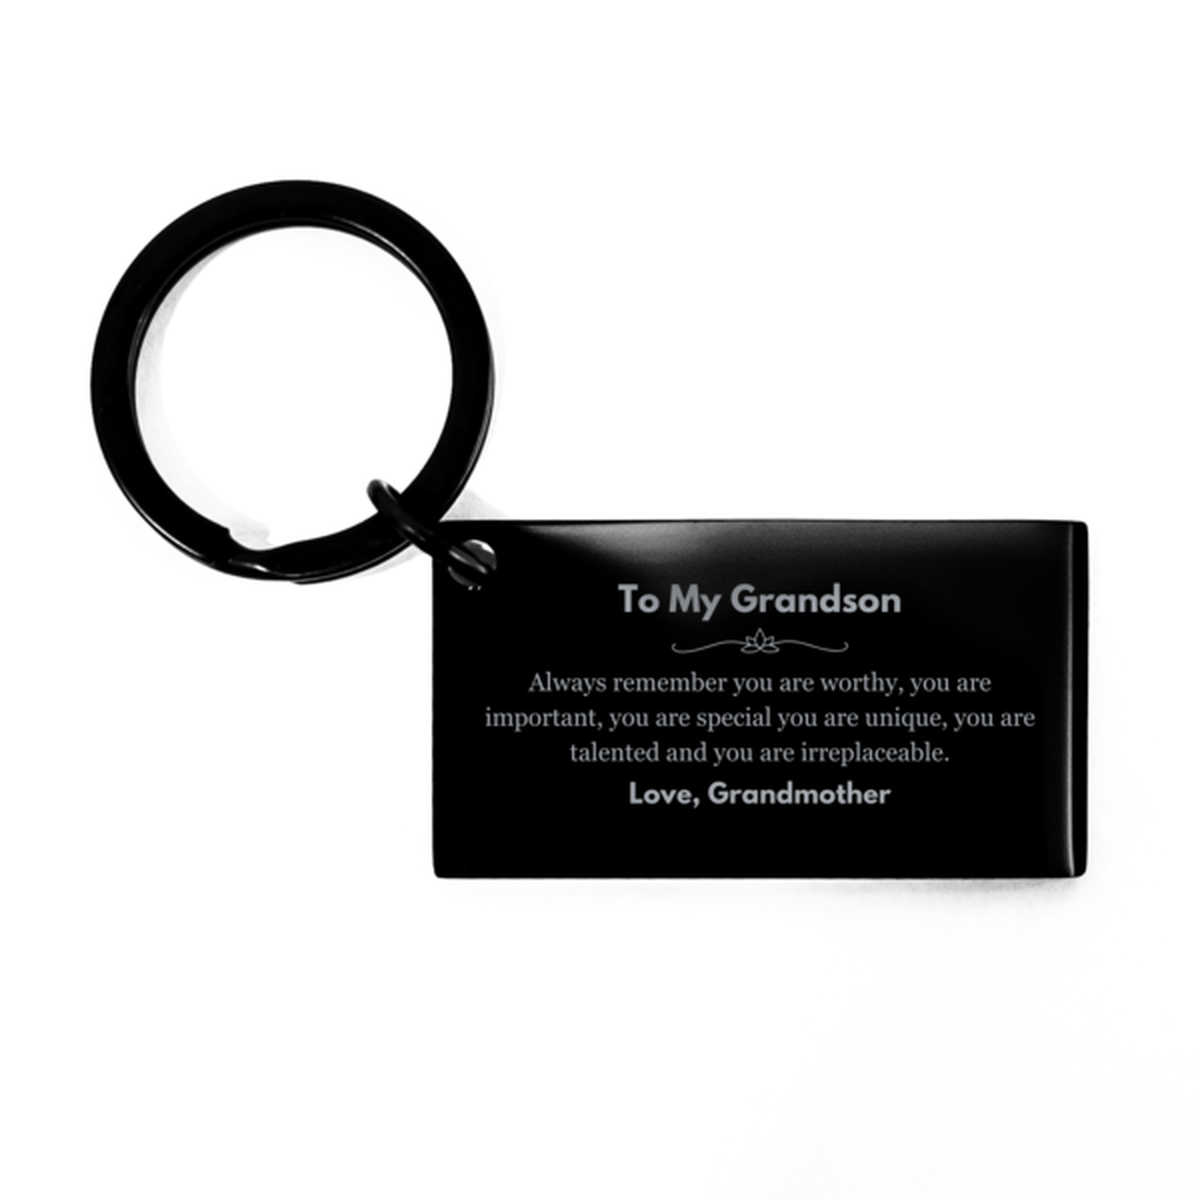 Grandson Birthday Gifts from Grandmother, Inspirational Keychain for Grandson Christmas Graduation Gifts for Grandson Always remember you are worthy, you are important. Love, Grandmother